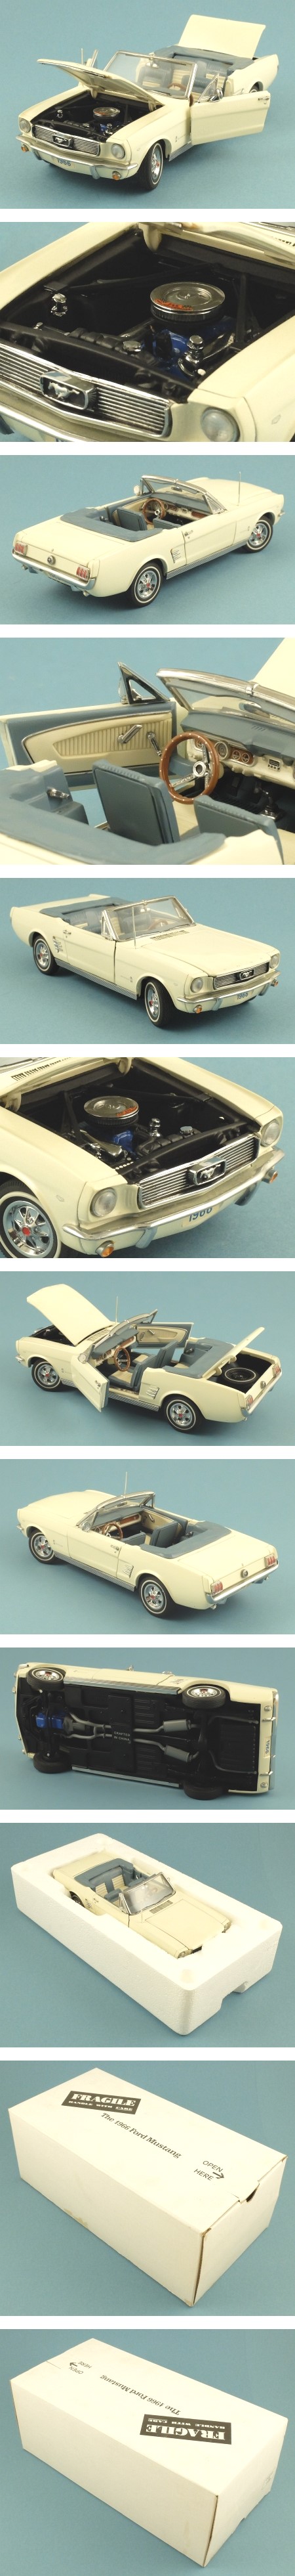 195-012 1966 Ford Mustang Convertible